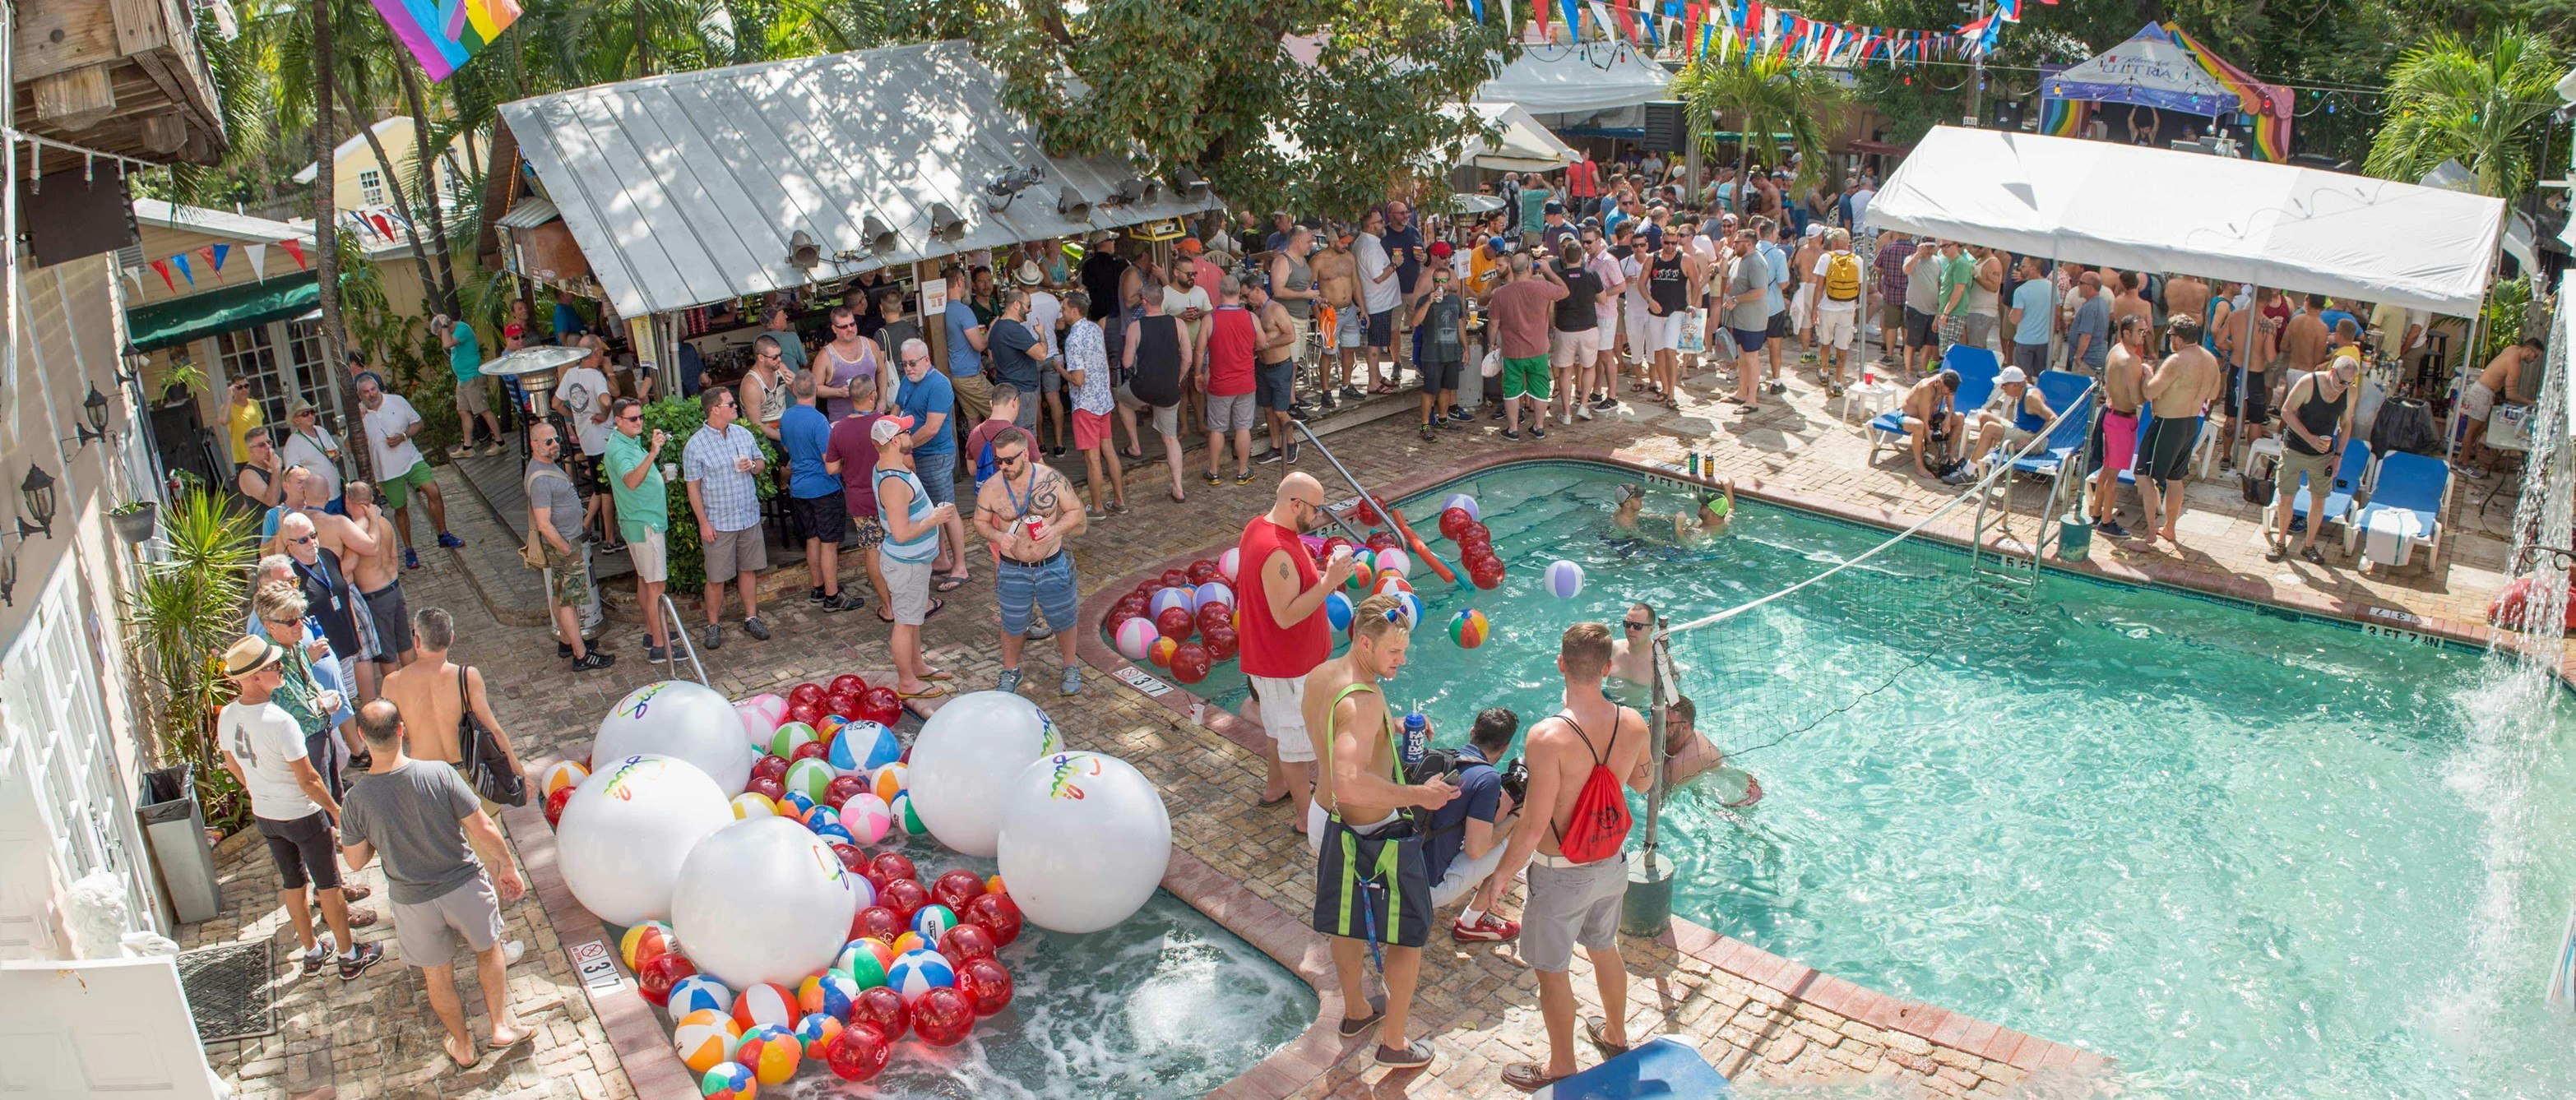 Clothed revelers surround the pool and hot tub at the Garden Bar at the Bourbon Street Pub, where a small covered outdoor bar and sun pavilions are strewn with red and blue streamers and gay pride flags. In the hot tub and pool are dozens of beach balls in every color and size.